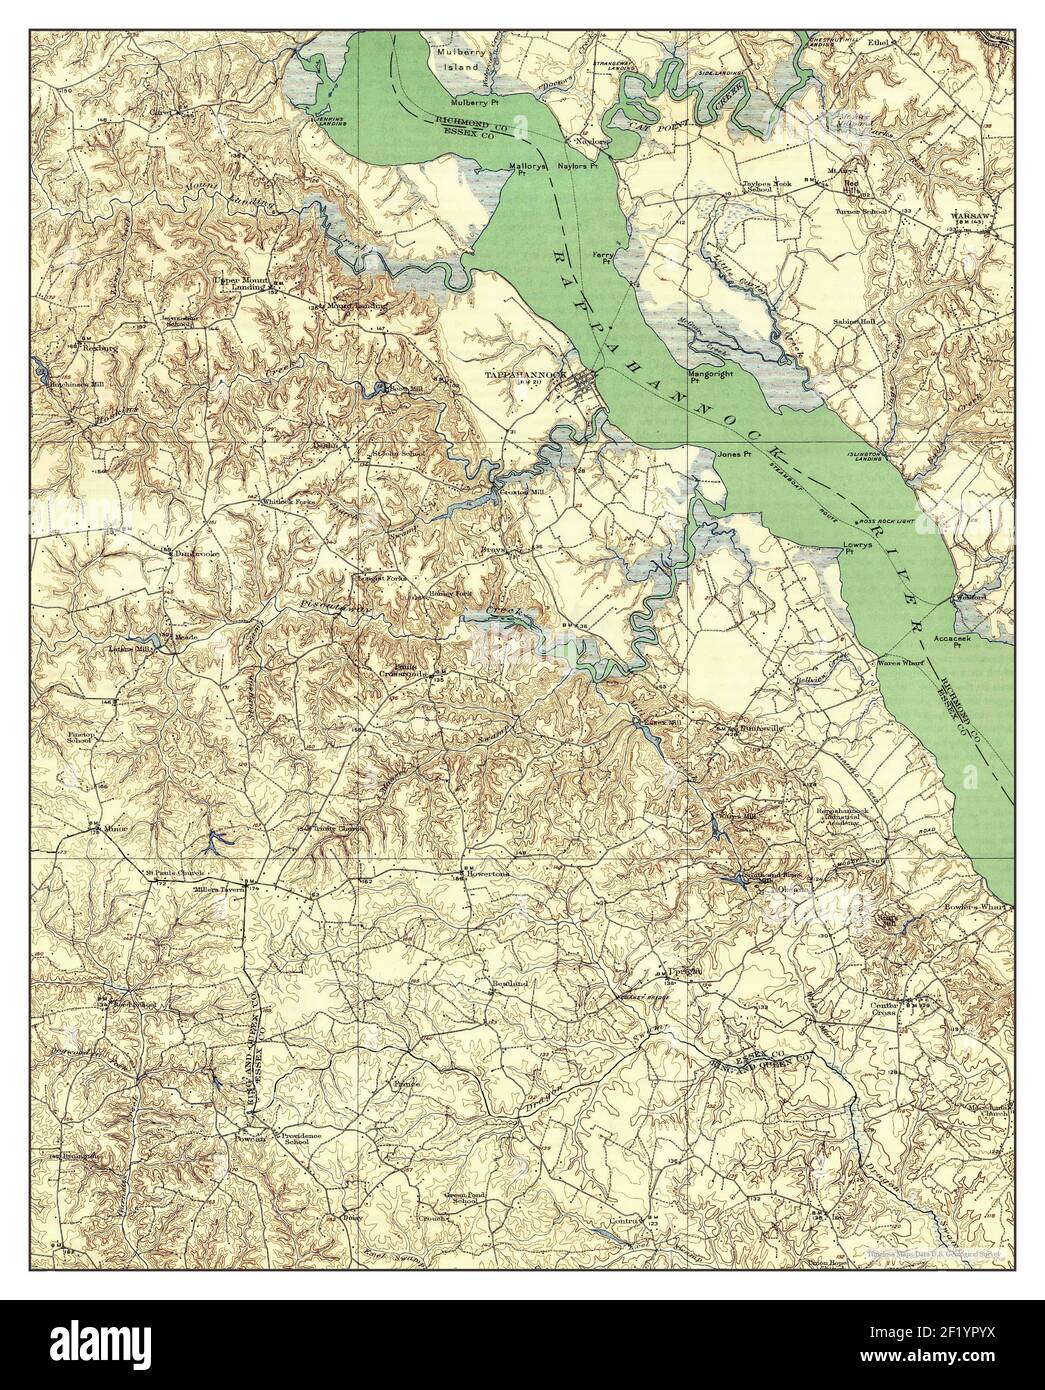 Tappahannock, Virginia, map 1919, 1:62500, United States of America by Timeless Maps, data U.S. Geological Survey Stock Photo